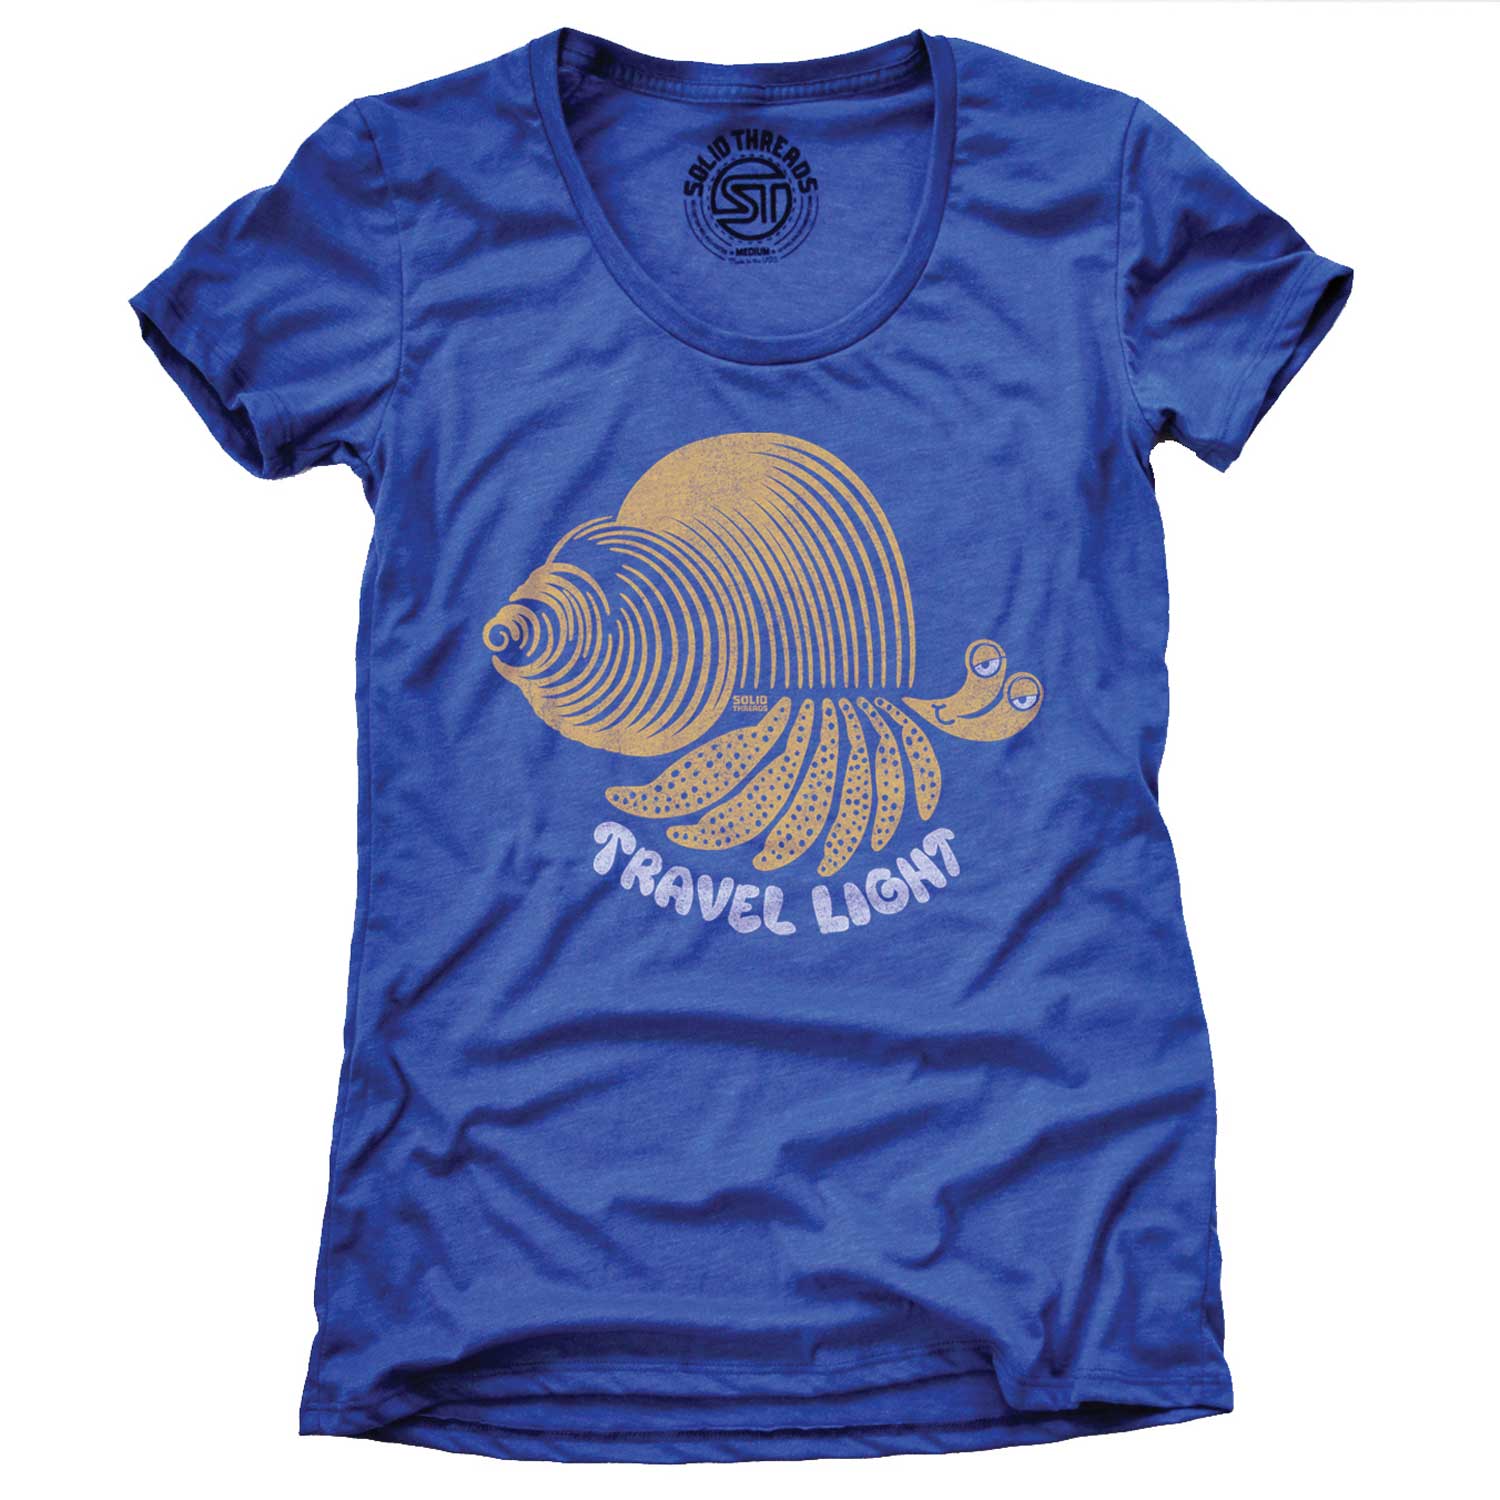 Women's Travel Light Funny Hermit Crab Graphic Tee | Vintage Mindfulness T-shirt | Solid Threads